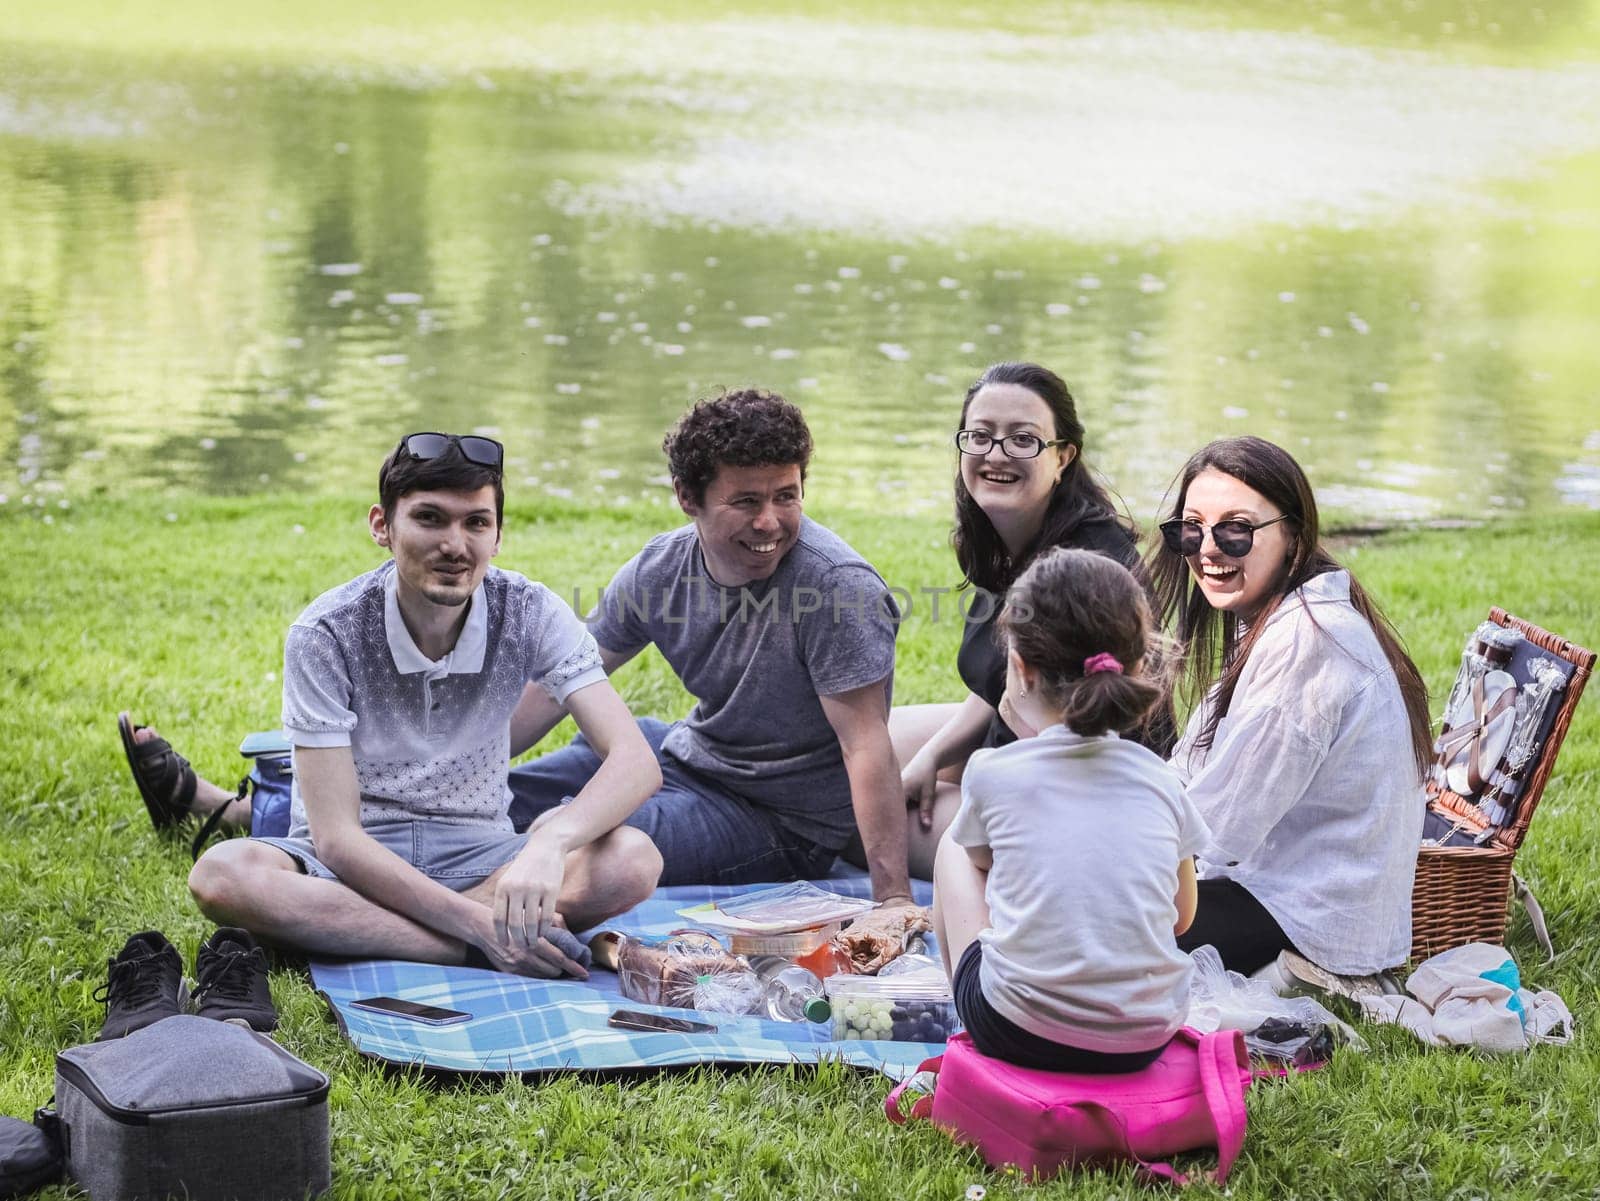 A large and friendly family with children on a picnic in the park. by Nataliya